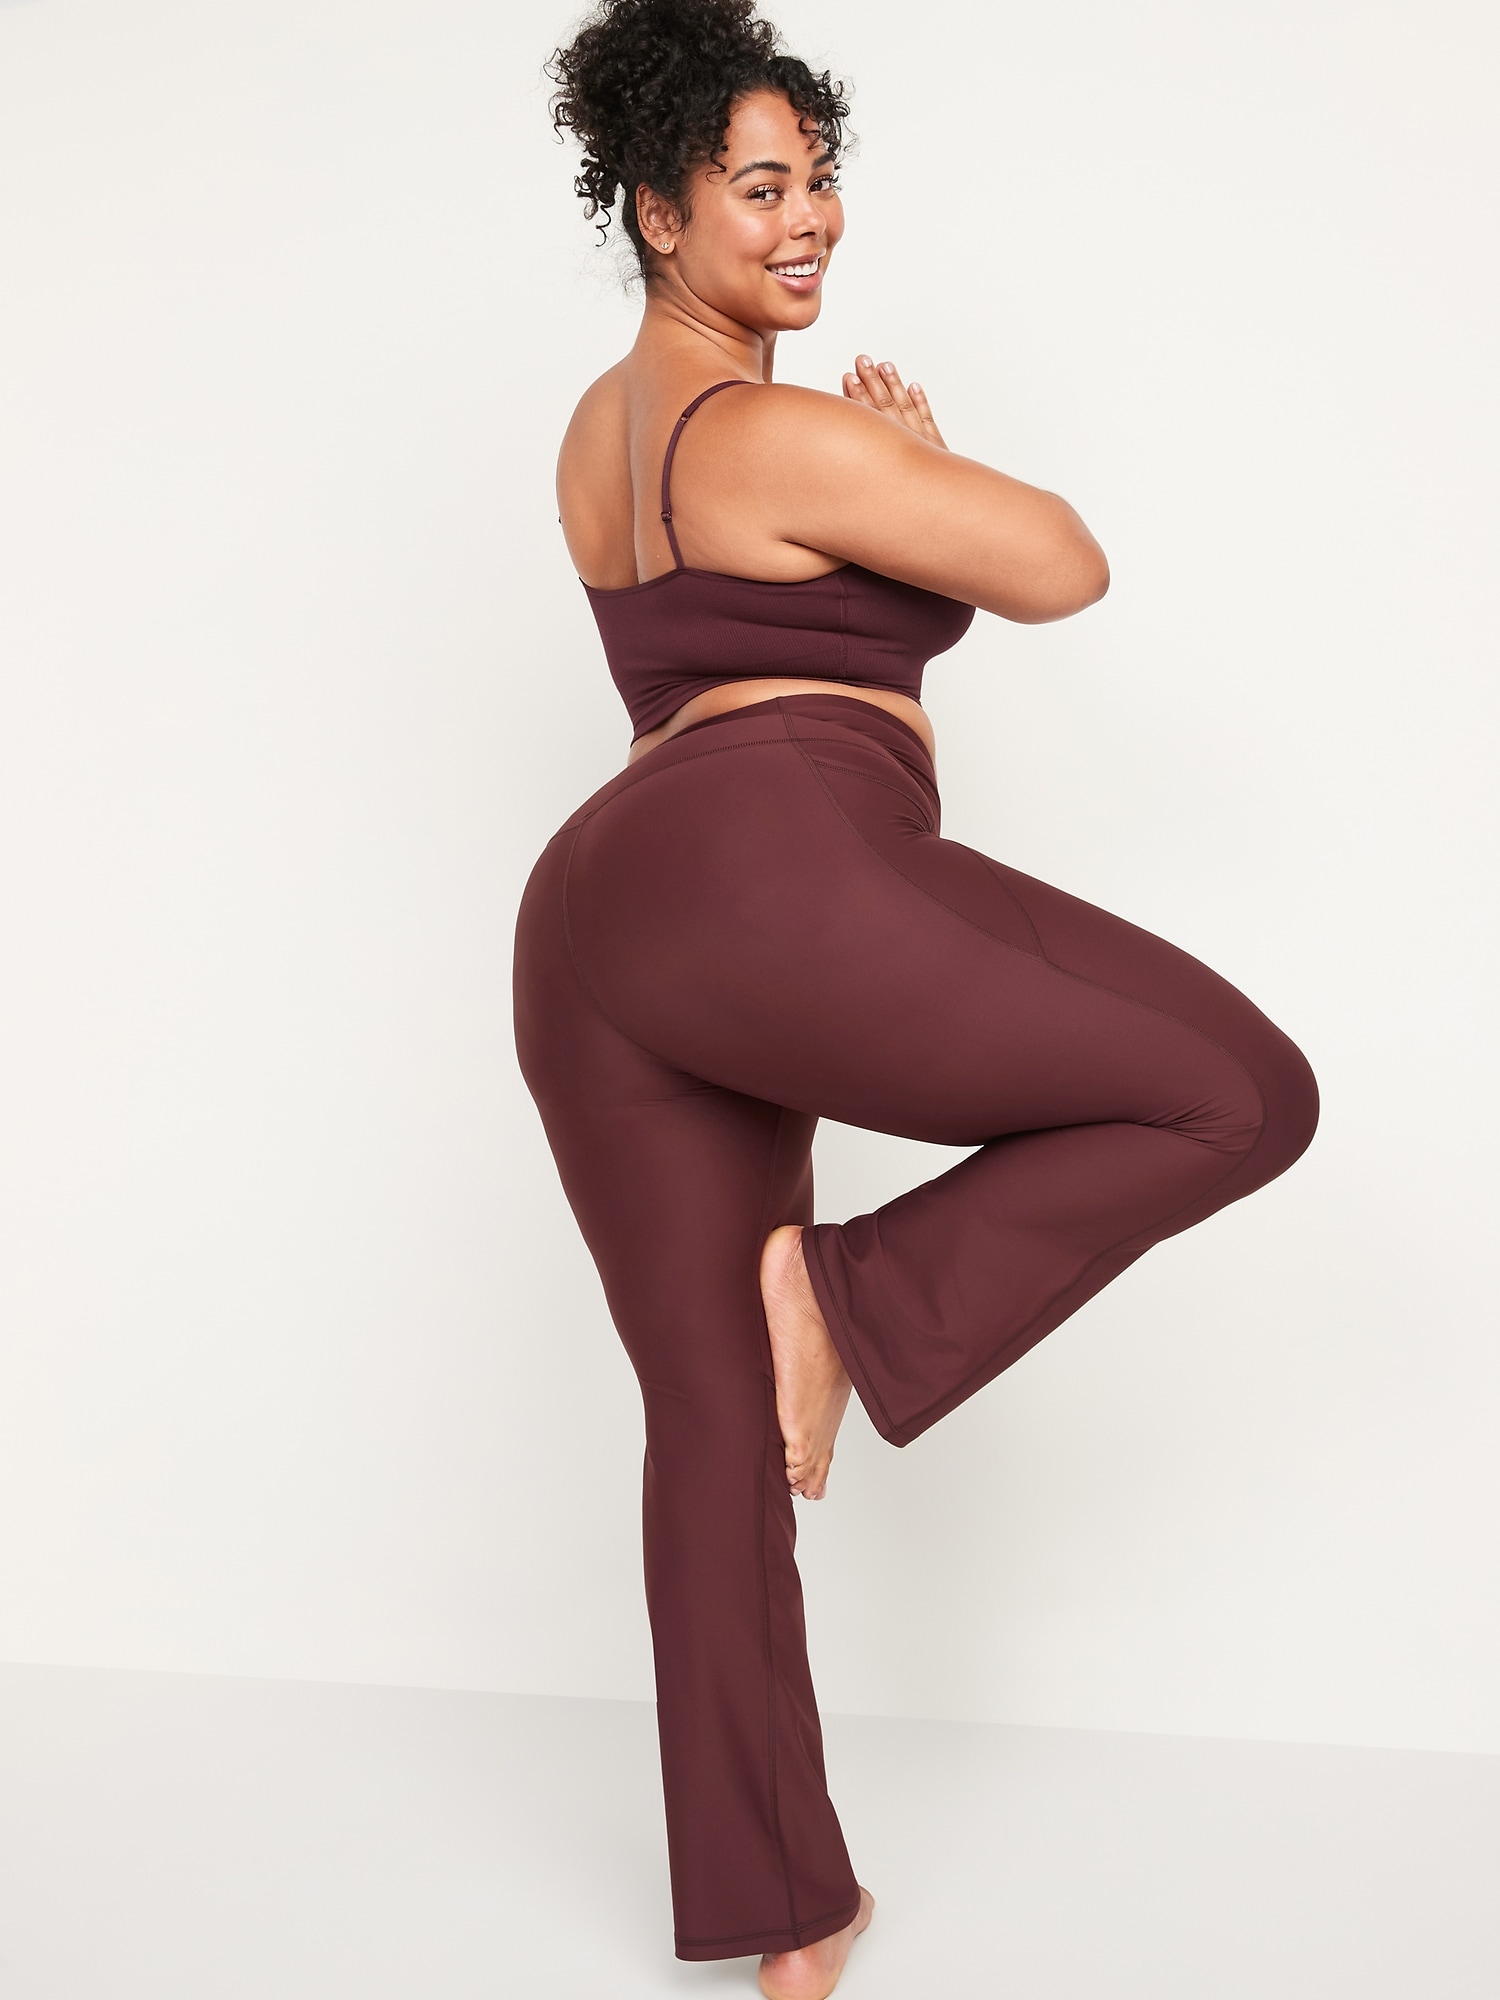 Sexy Dance Women Bootcut Yoga Pants with Pockets High Waist Boot Cut Gym  Fitness Trousers Plus Size Pant Stretch Yoga Workout Pants for Women Ladies  